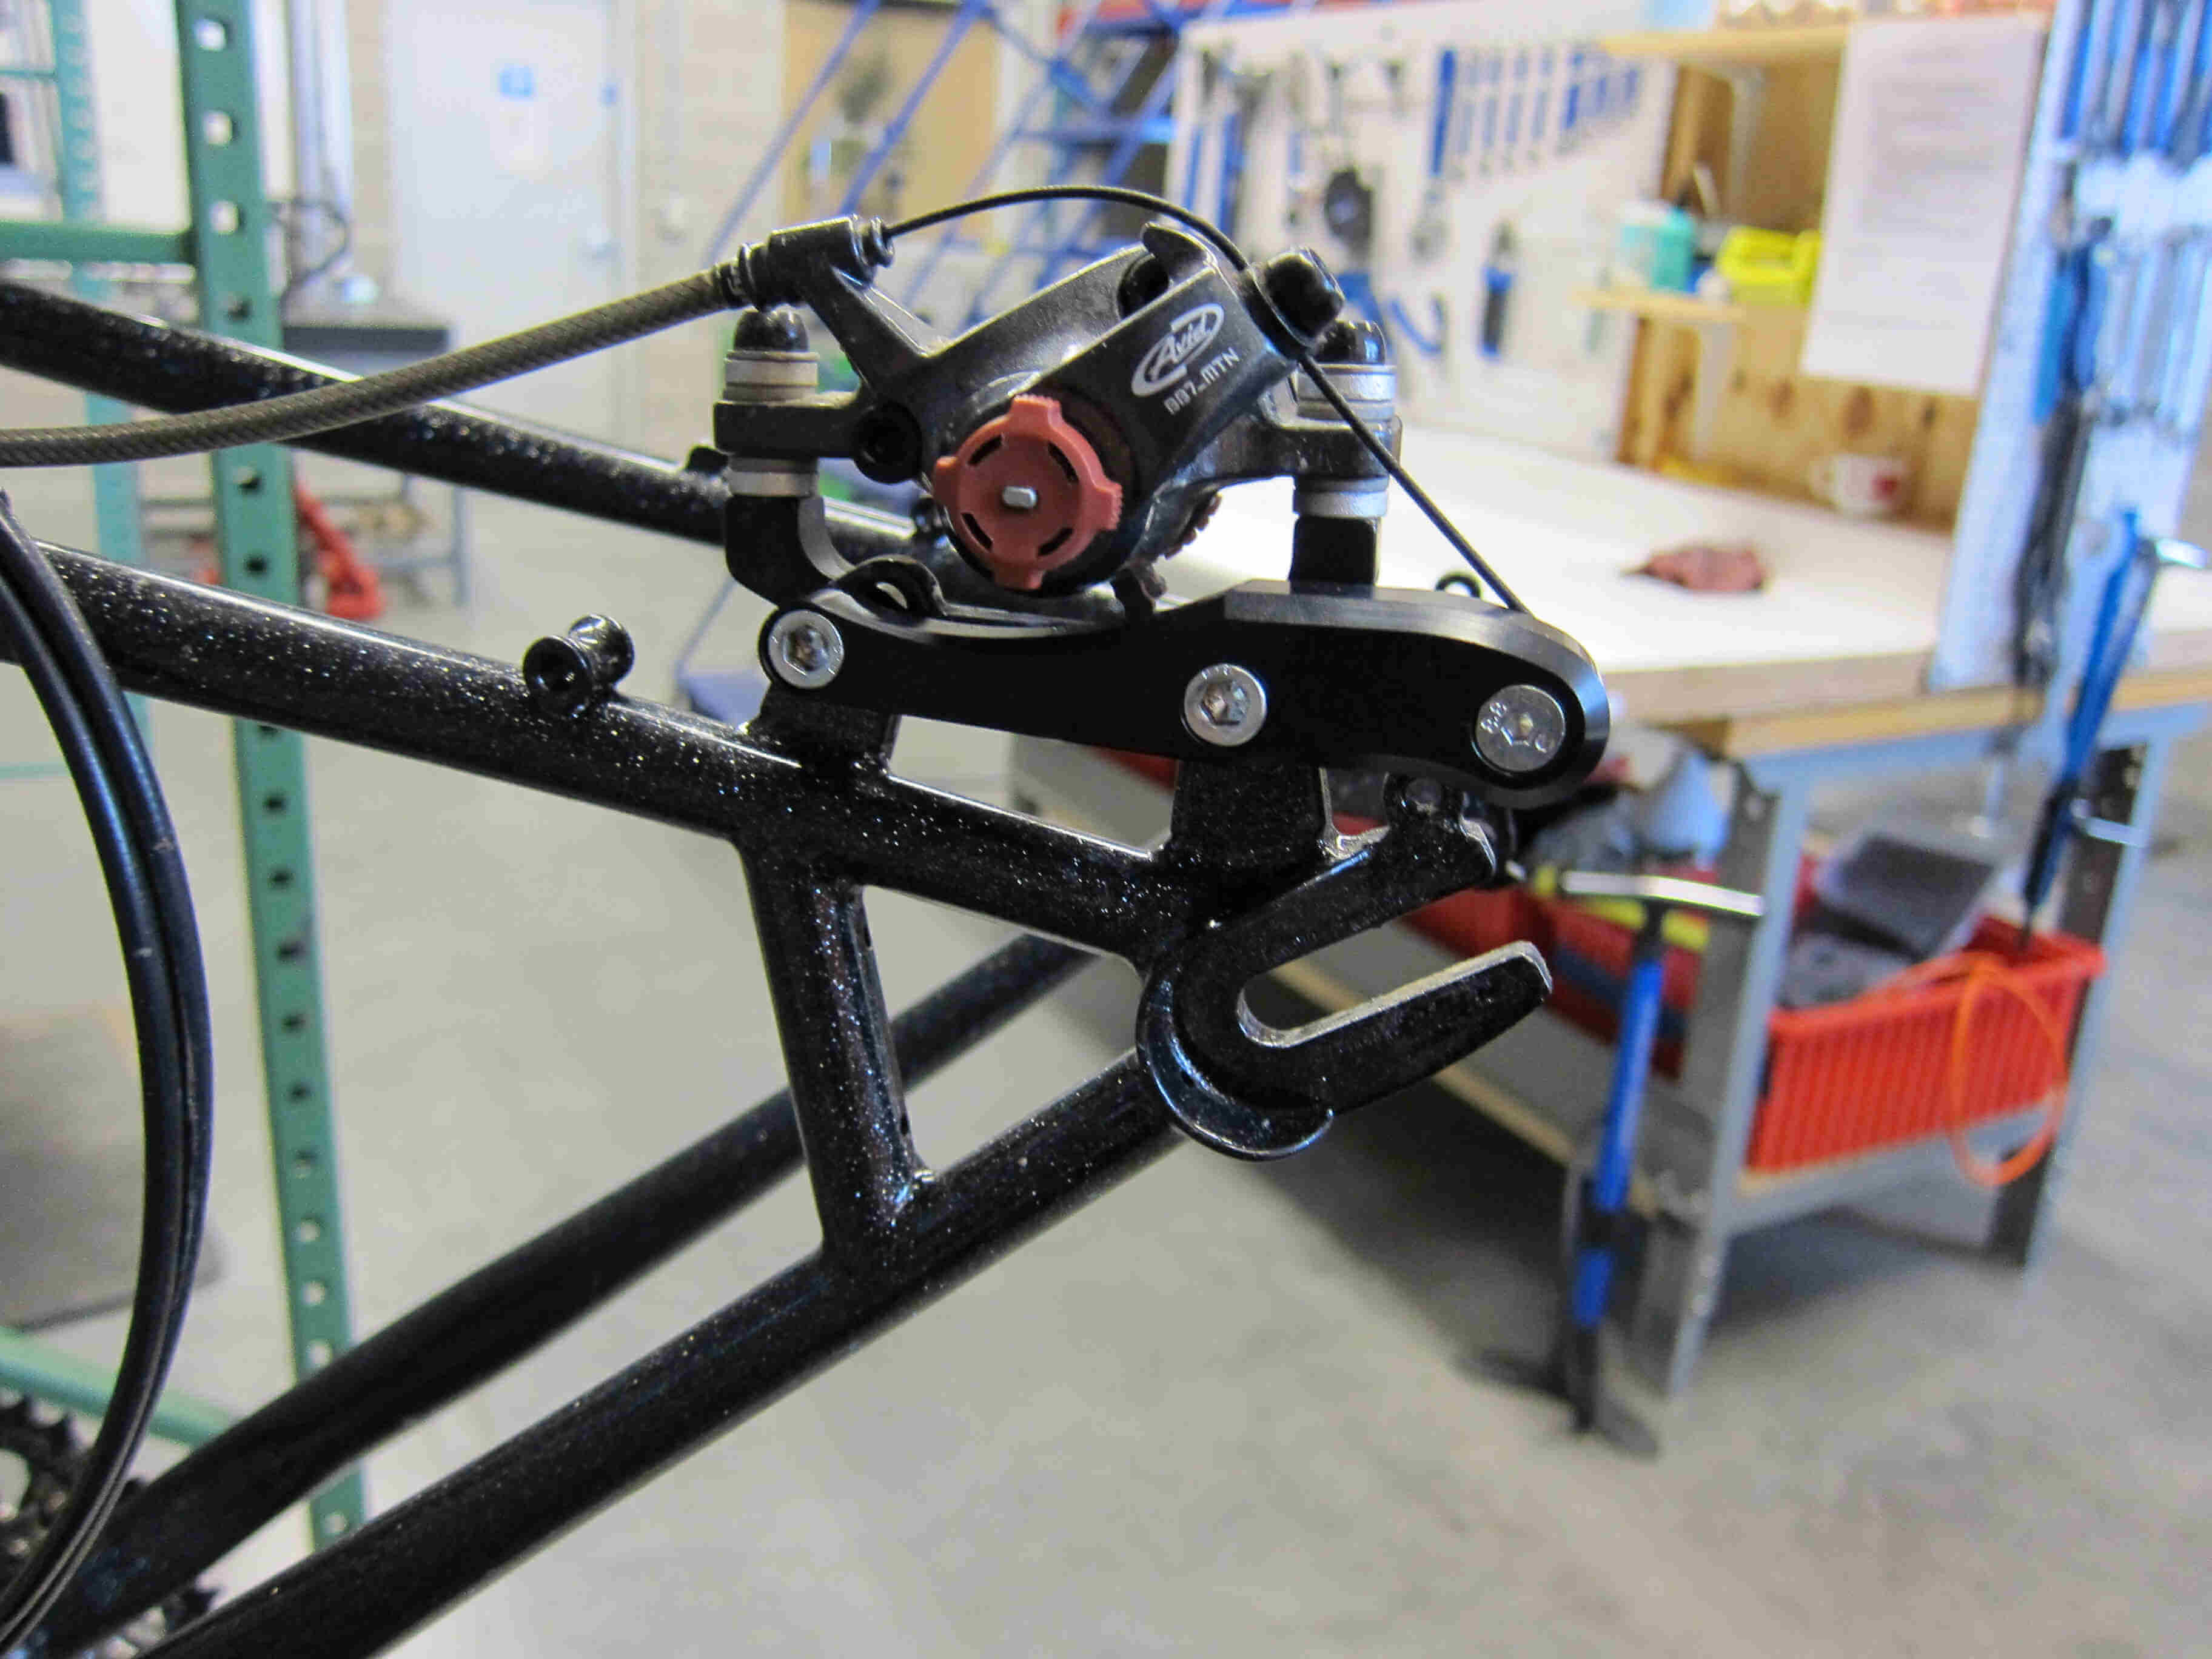 Left side view of a Surly Moonlander fat bike frame, focused over the rear dropouts